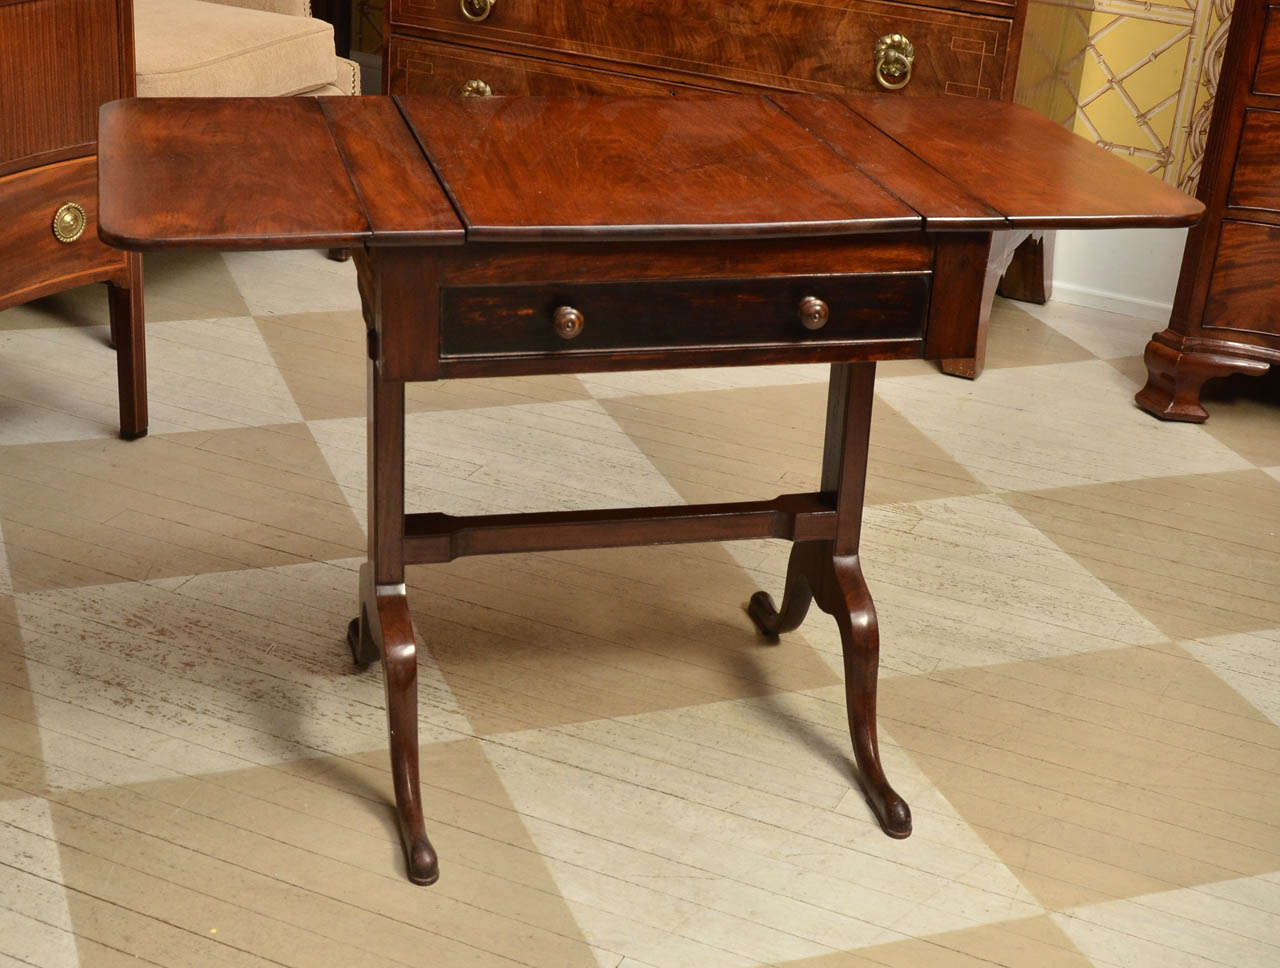 19th Century English Regency Mahogany Dressing Table

This unusual table has a fold out mirror framed with mahogany and two sides which open out and a working drawer.  When the mirror folds down the top of the table is beautiful solid mahogany.